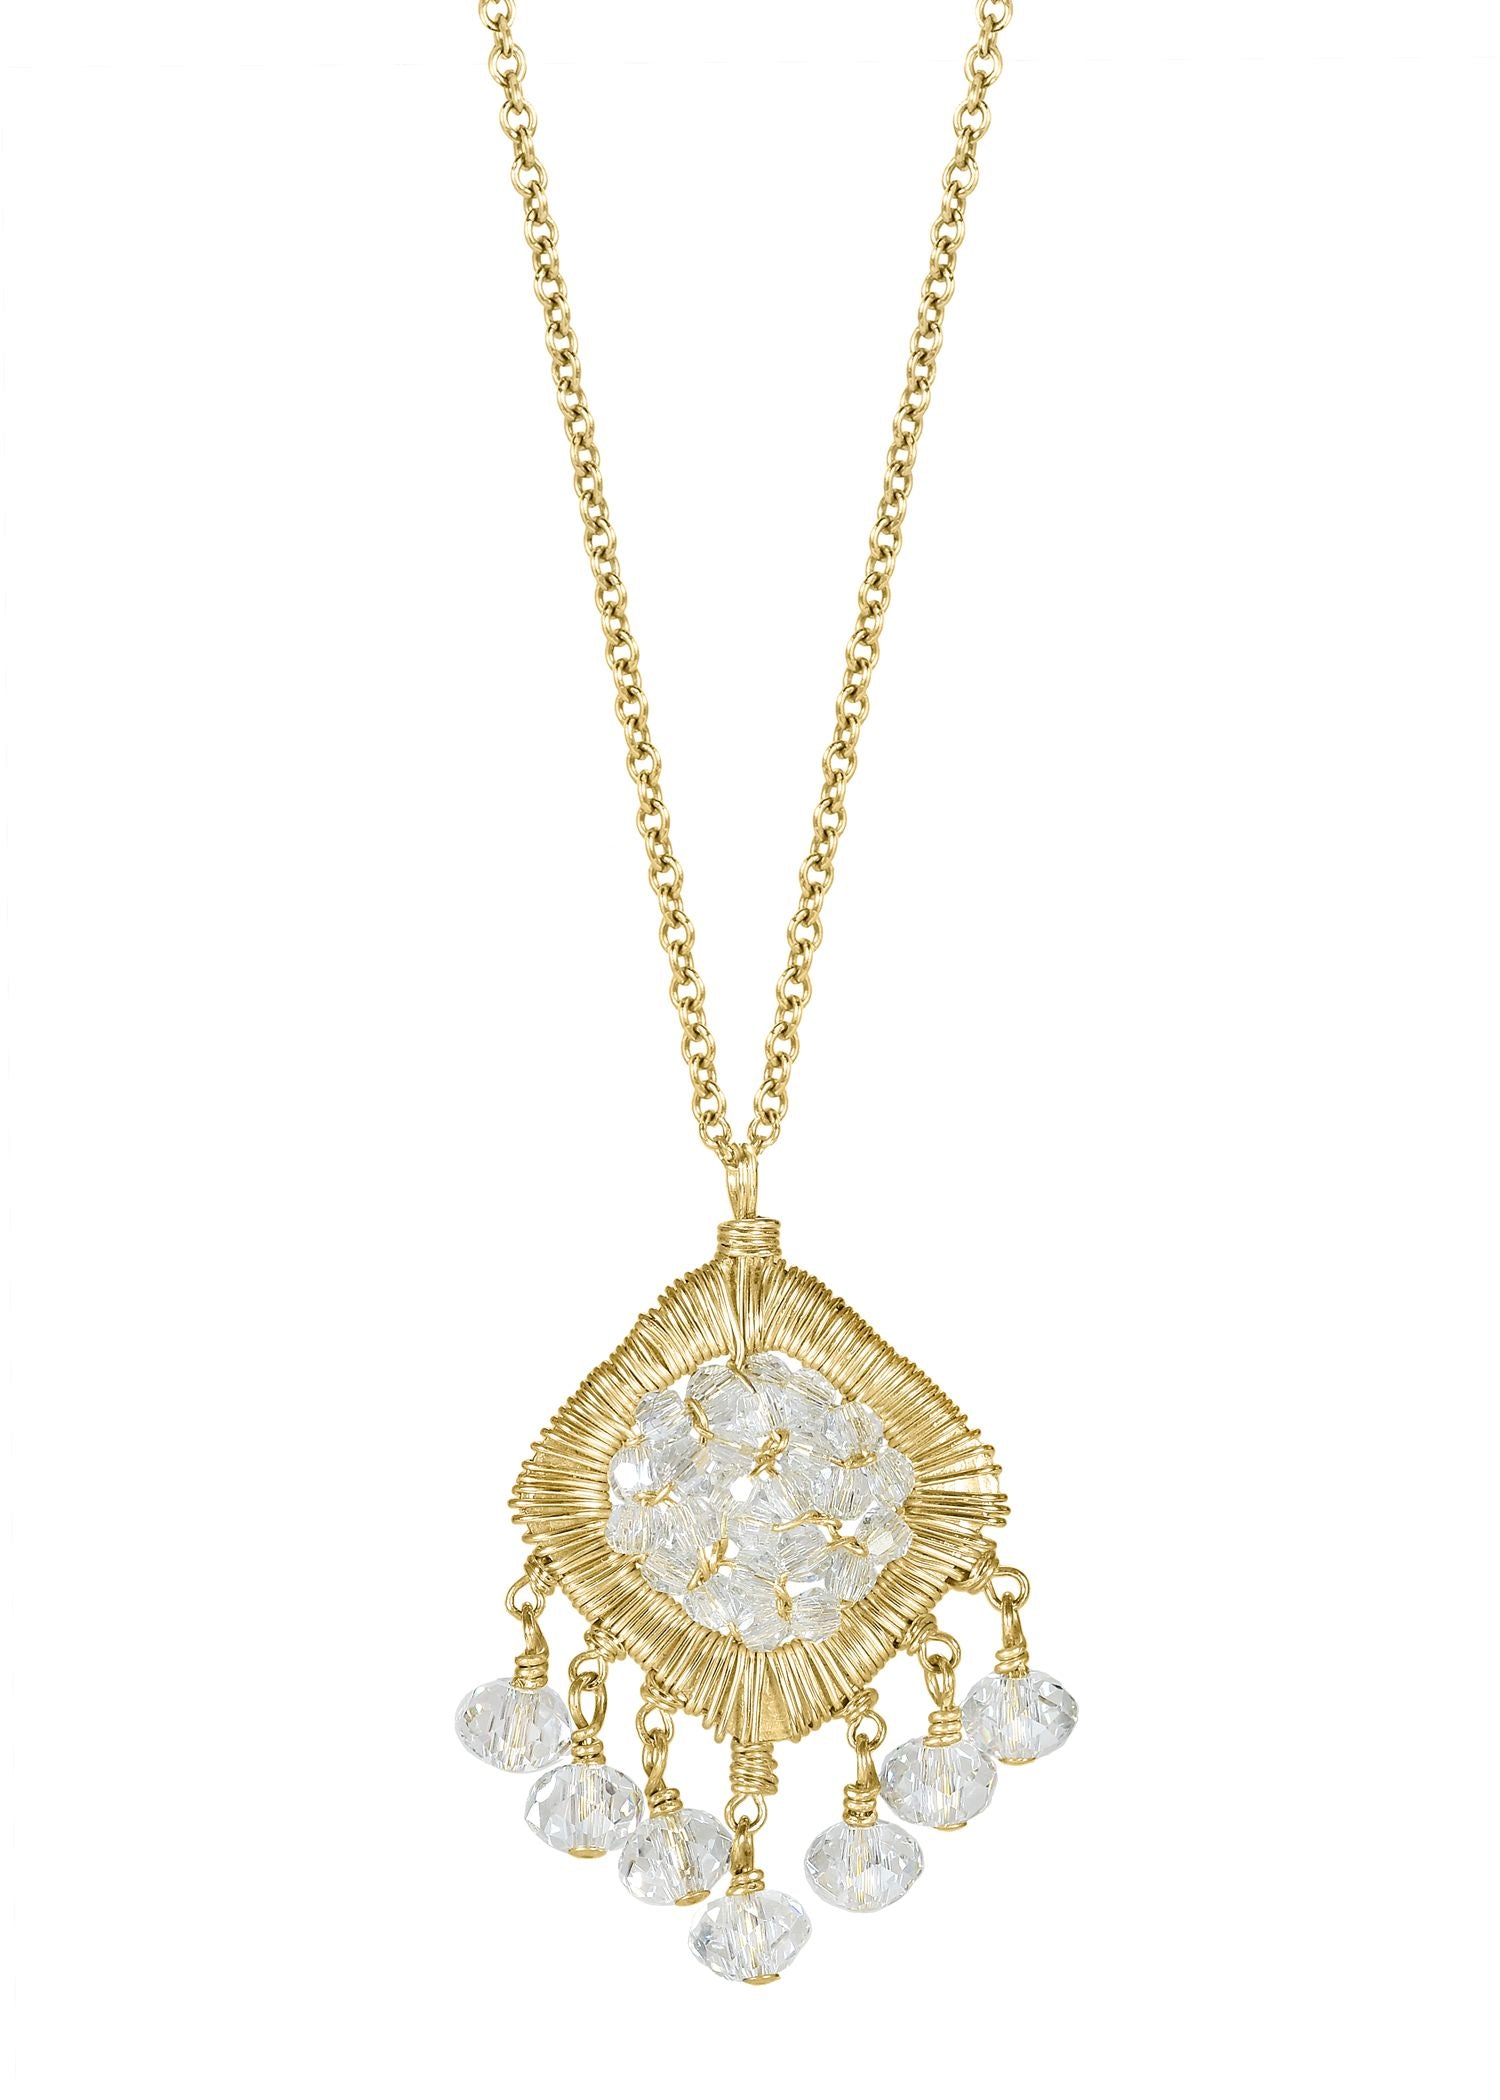 Crystal 14k gold fill Necklace measures 16” in length Pendant measures 15/16” in length and 7/8” in width Handmade in our Los Angeles studio